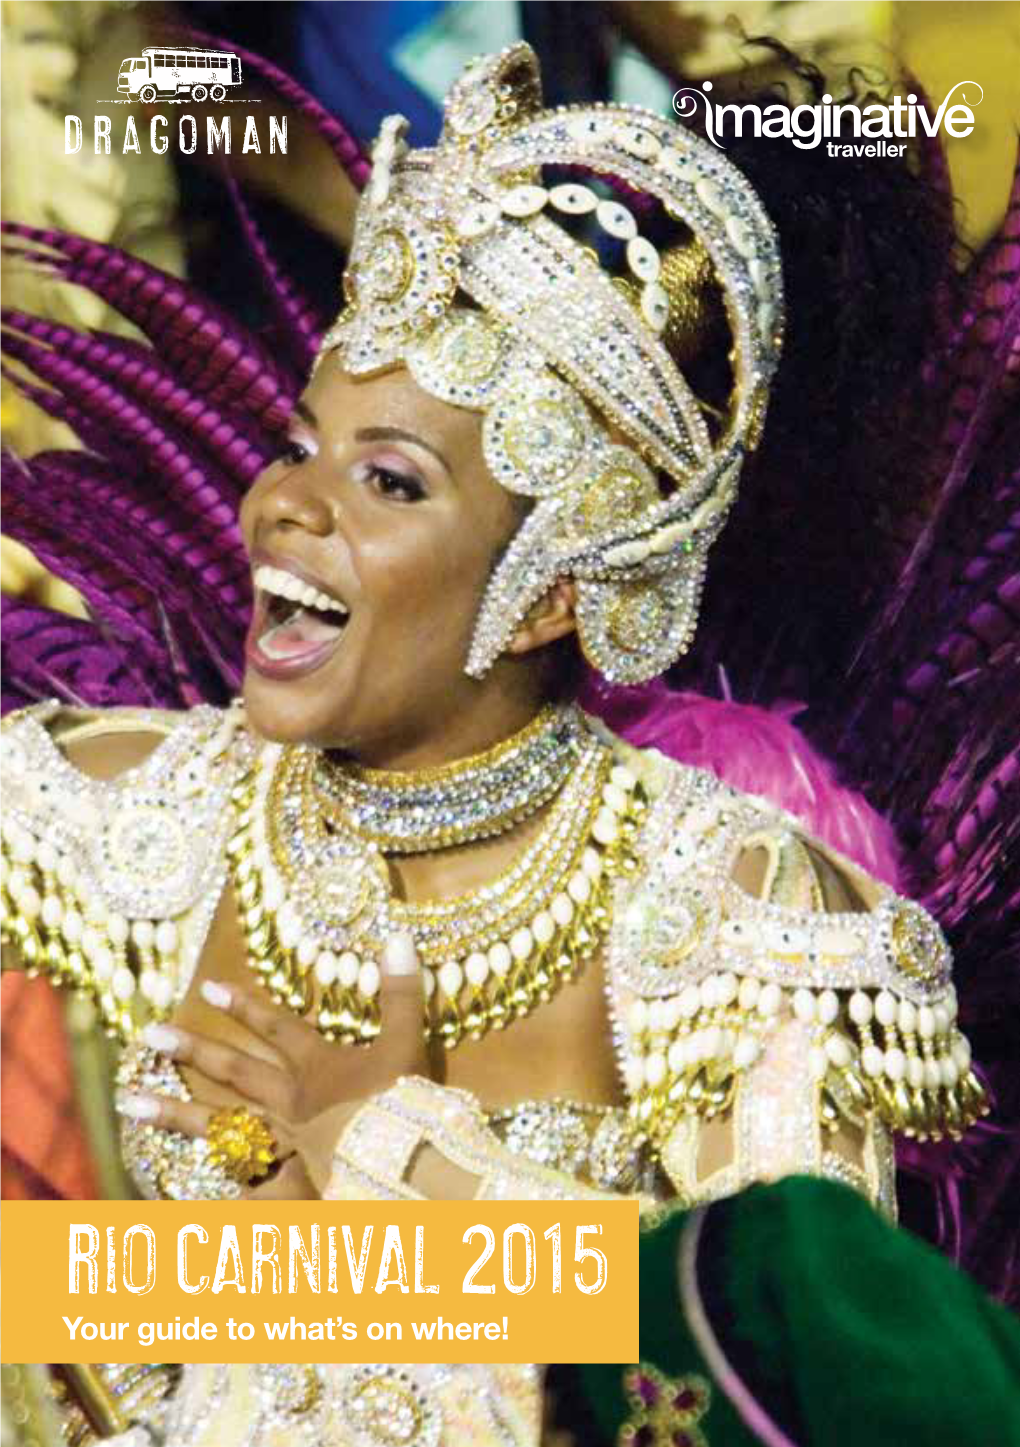 Rio Carnival 2015 Your Guide to What’S on Where! Contents